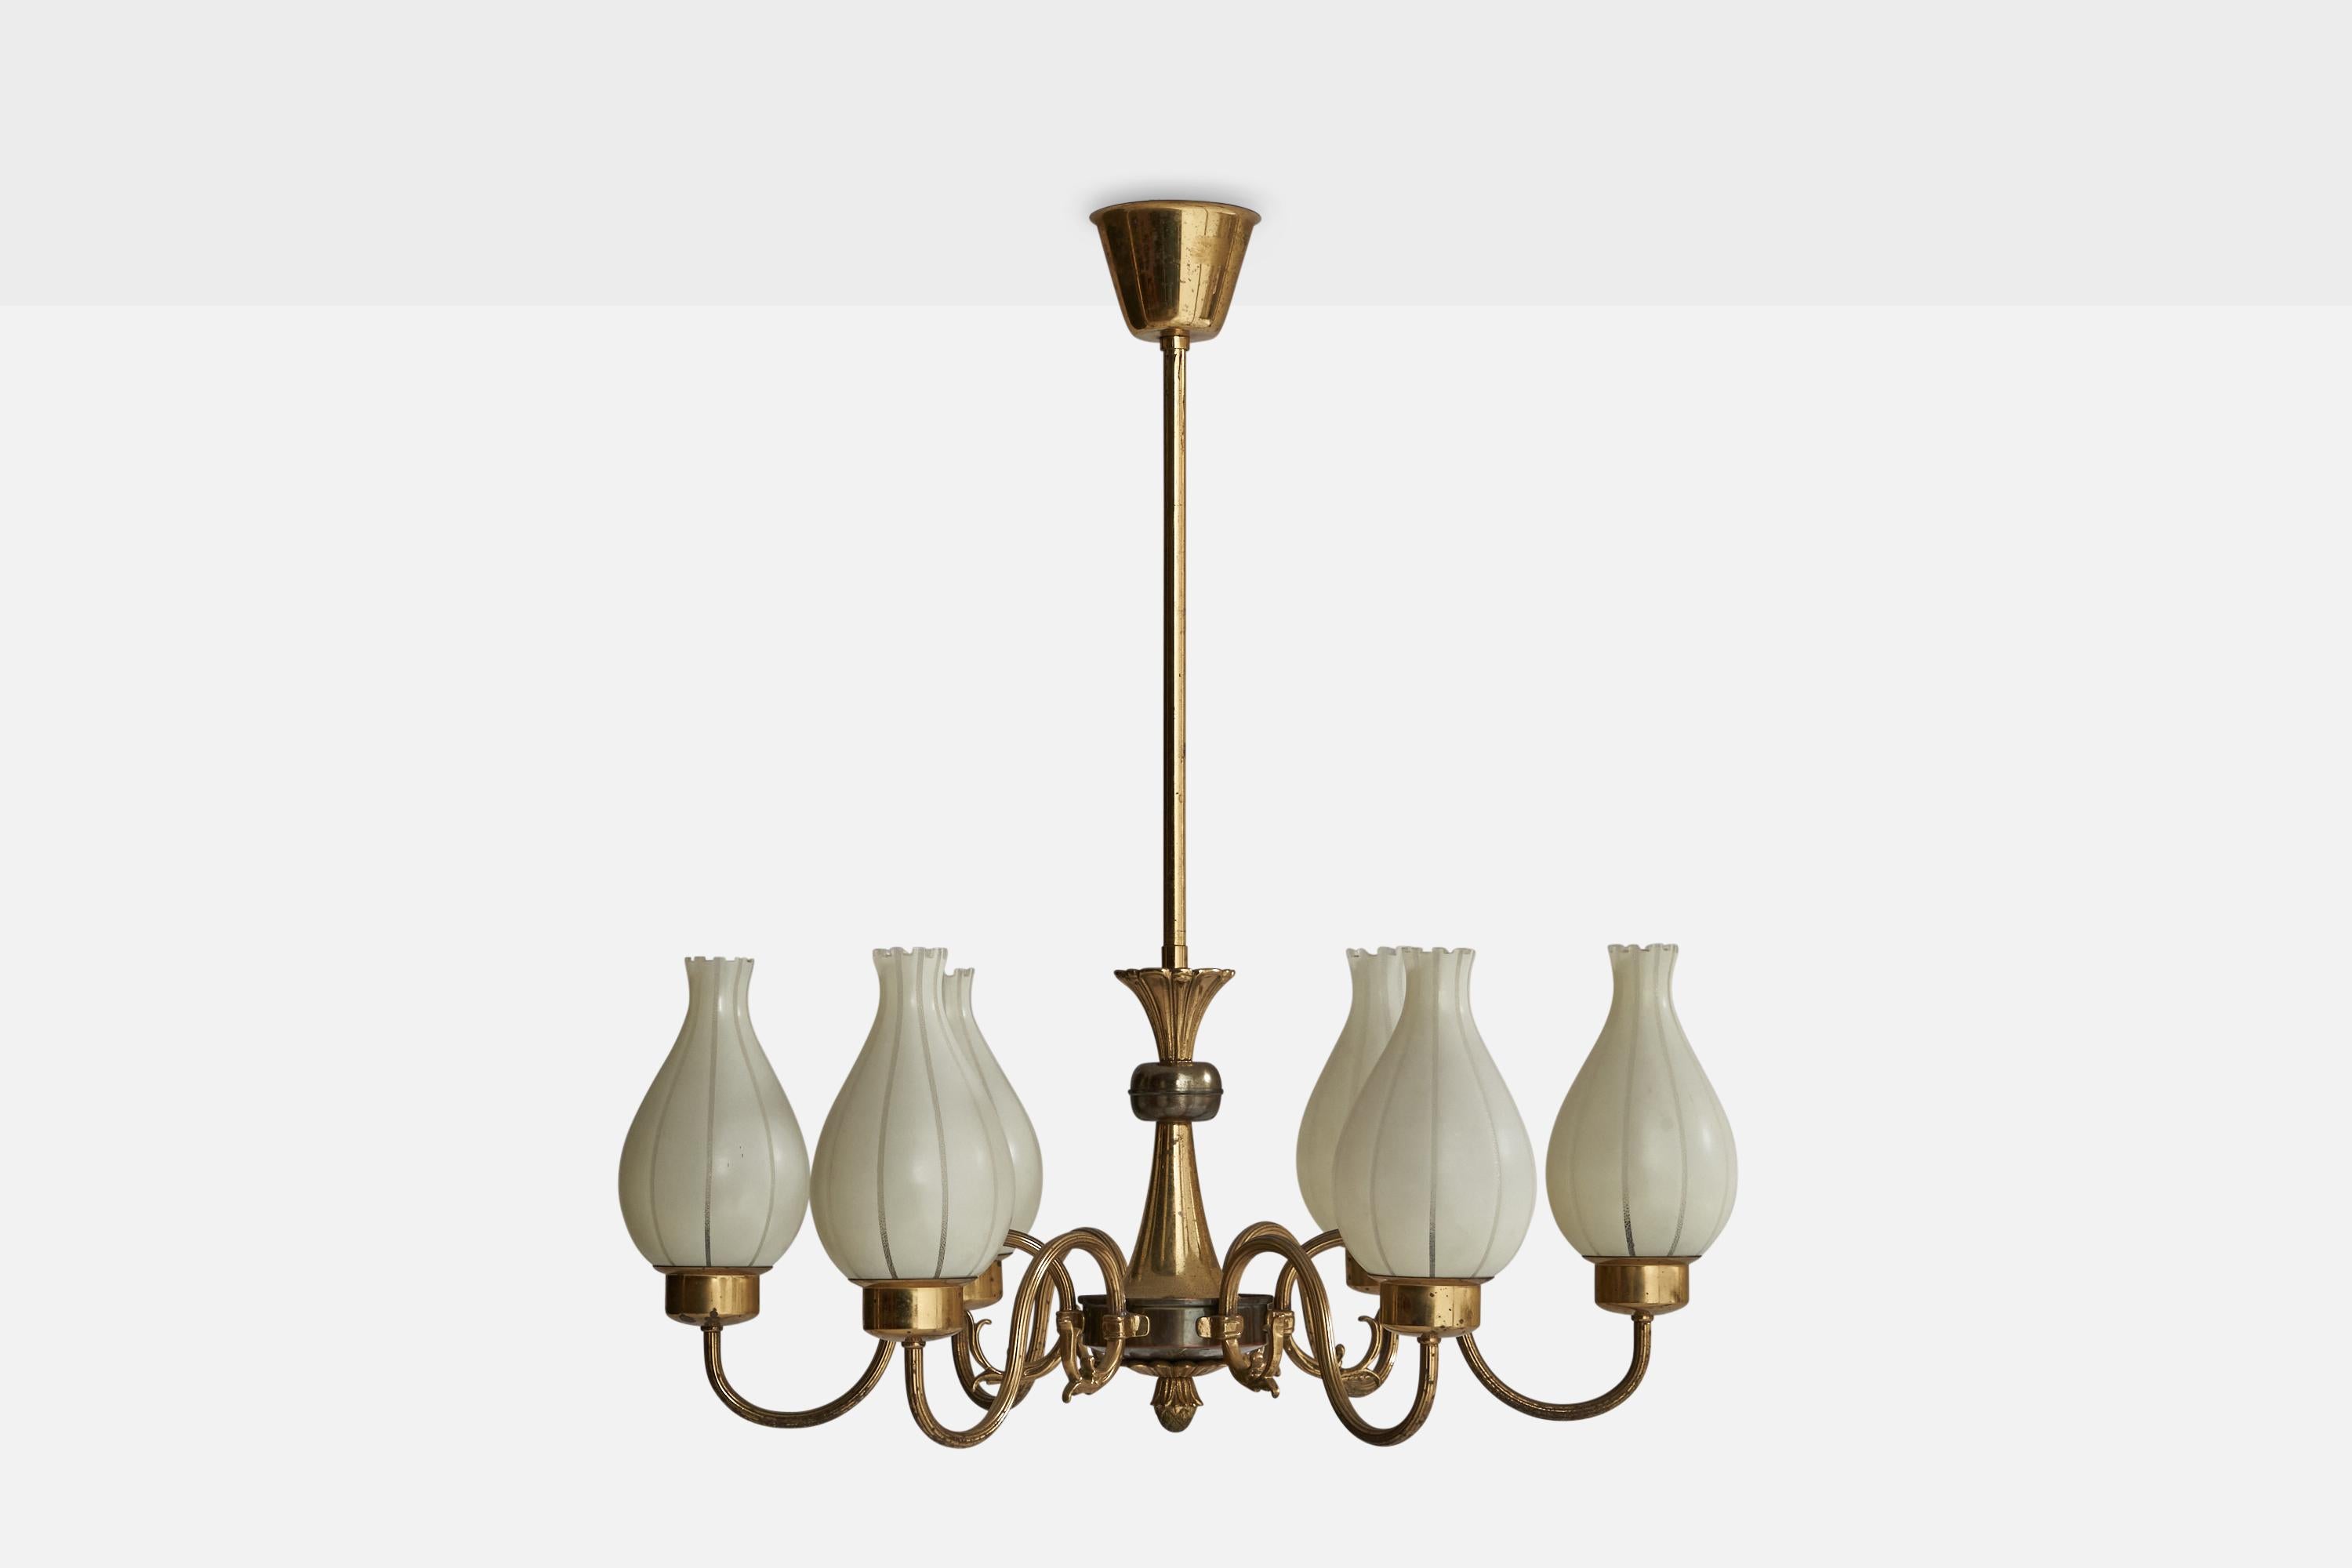 A six-armed brass and etched glass chandelier designed and produced in Sweden, 1930s.

Dimensions of canopy (inches): 2.6” H x 3.75” Diameter
Socket takes standard E-14 bulbs. 6 sockets.There is no maximum wattage stated on the fixture. All lighting